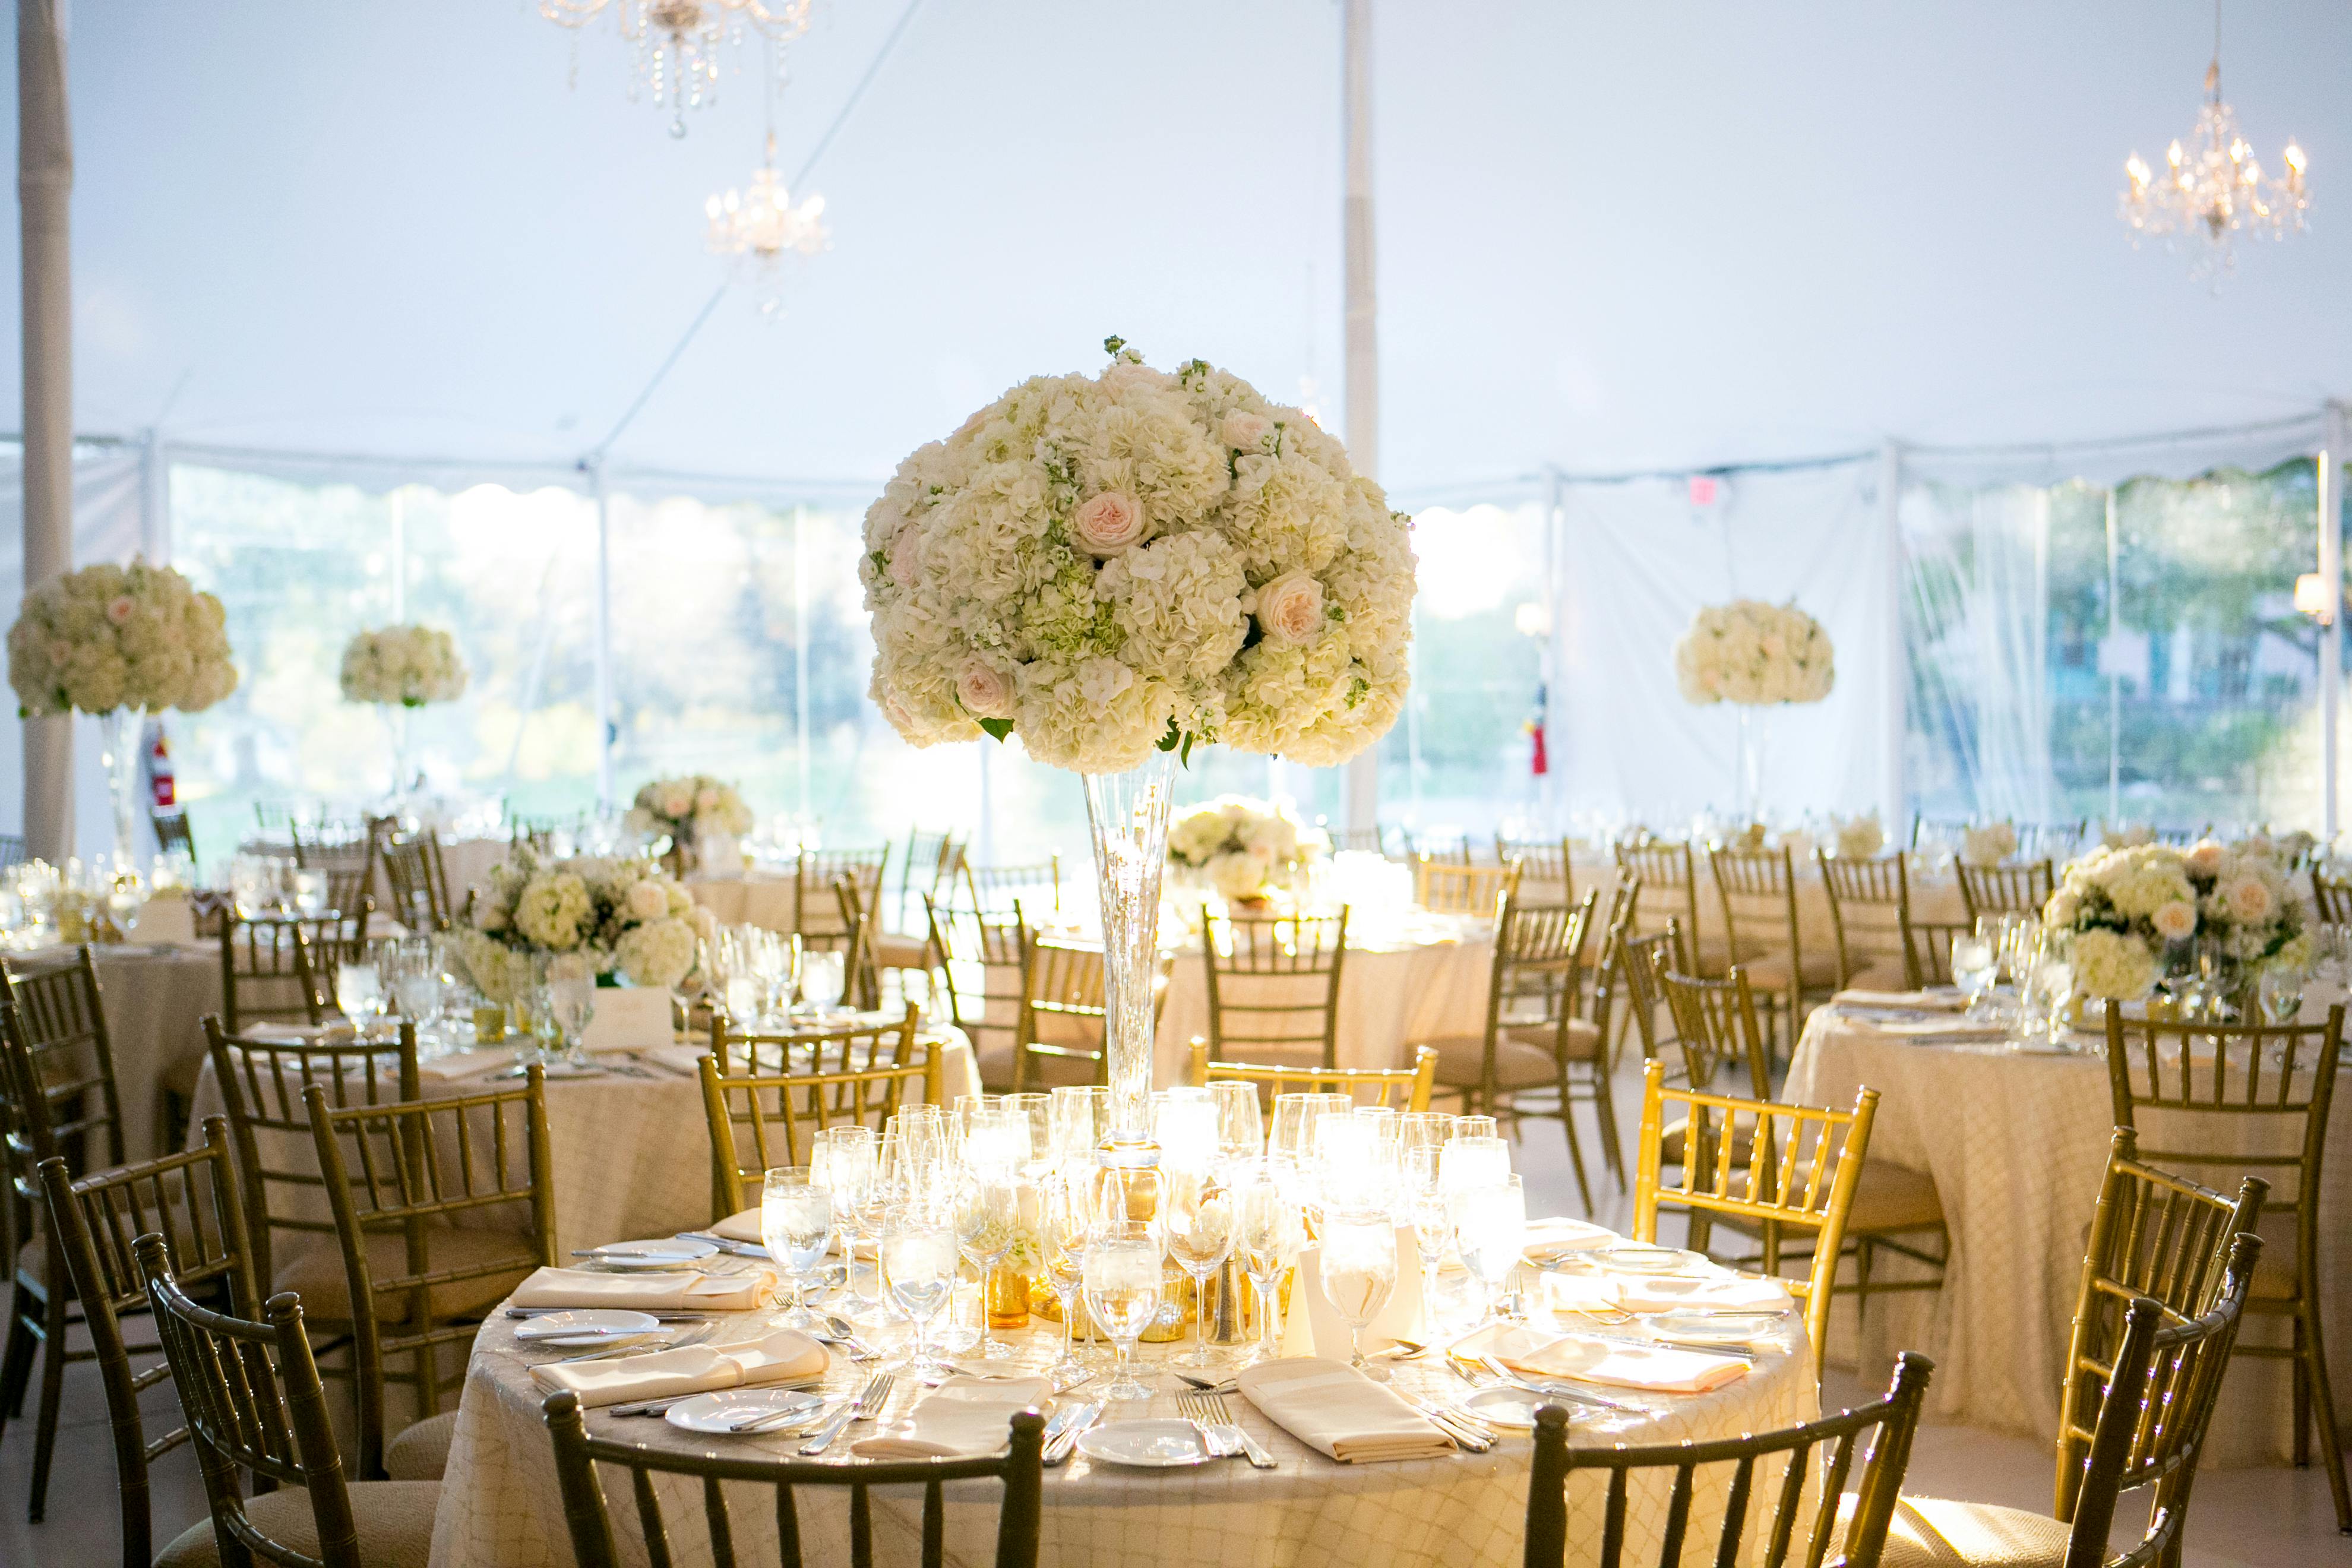 Tented Reception Venue with Towering Hydrangea Wedding Centerpieces and Clear Vases on Banquet Tables